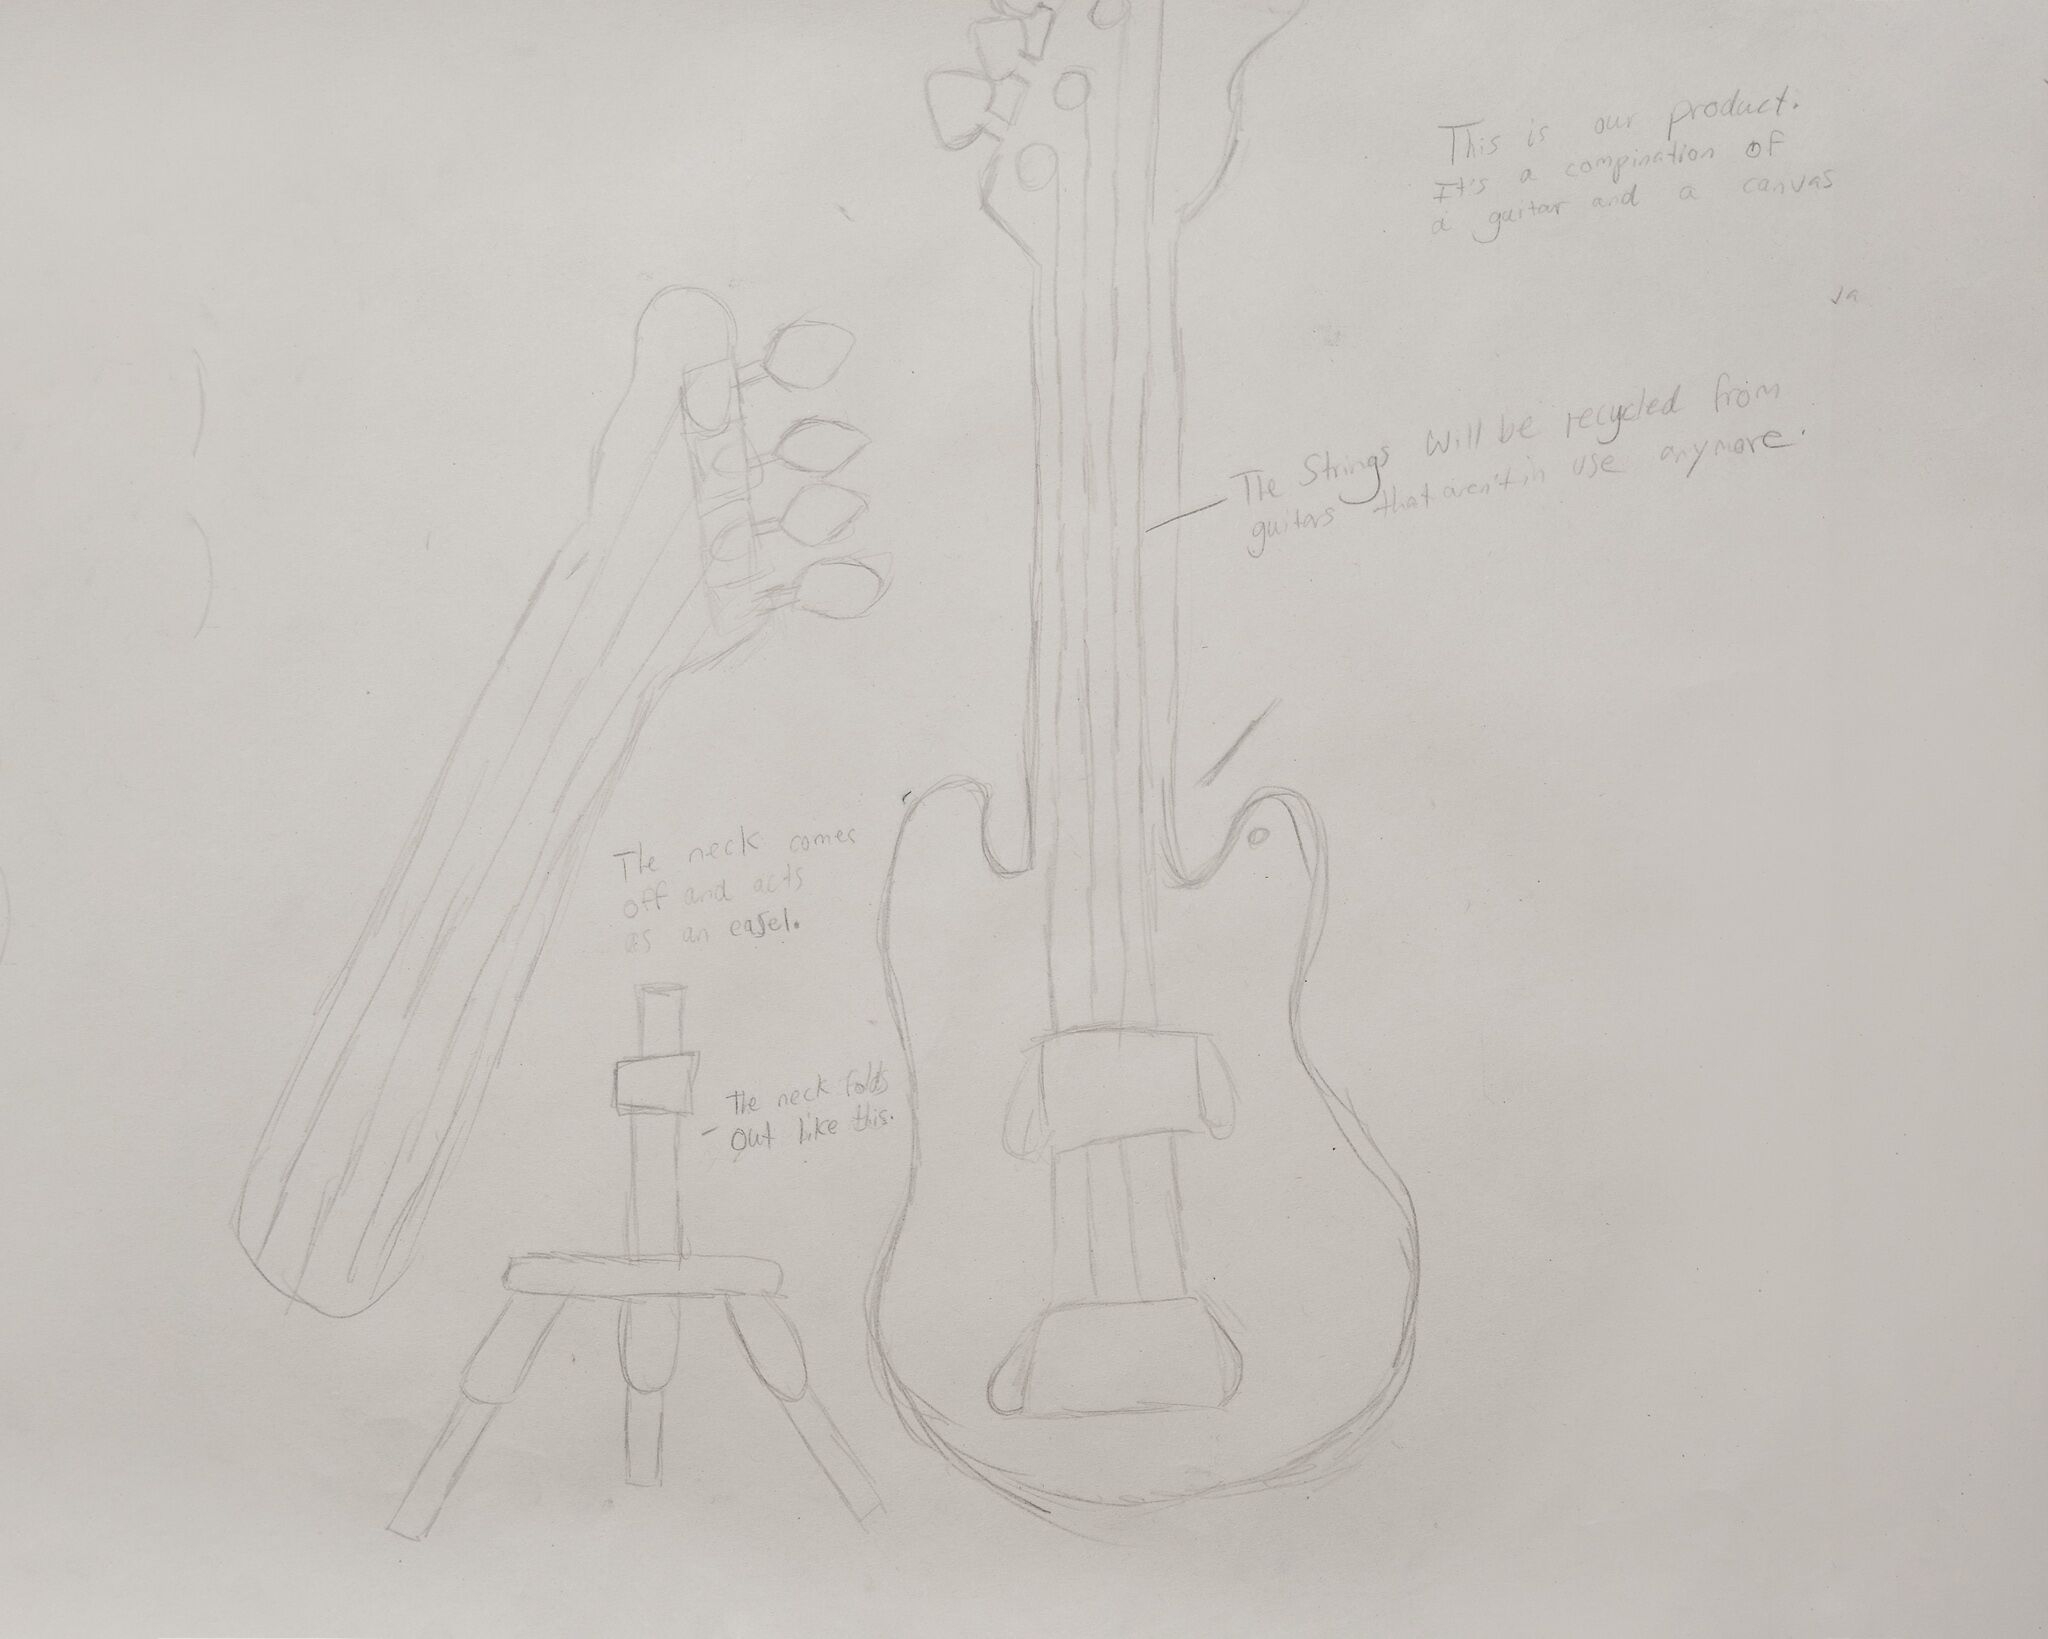 2.9 Multi Functional Design Of An Easel That Transforms Into A Guitar